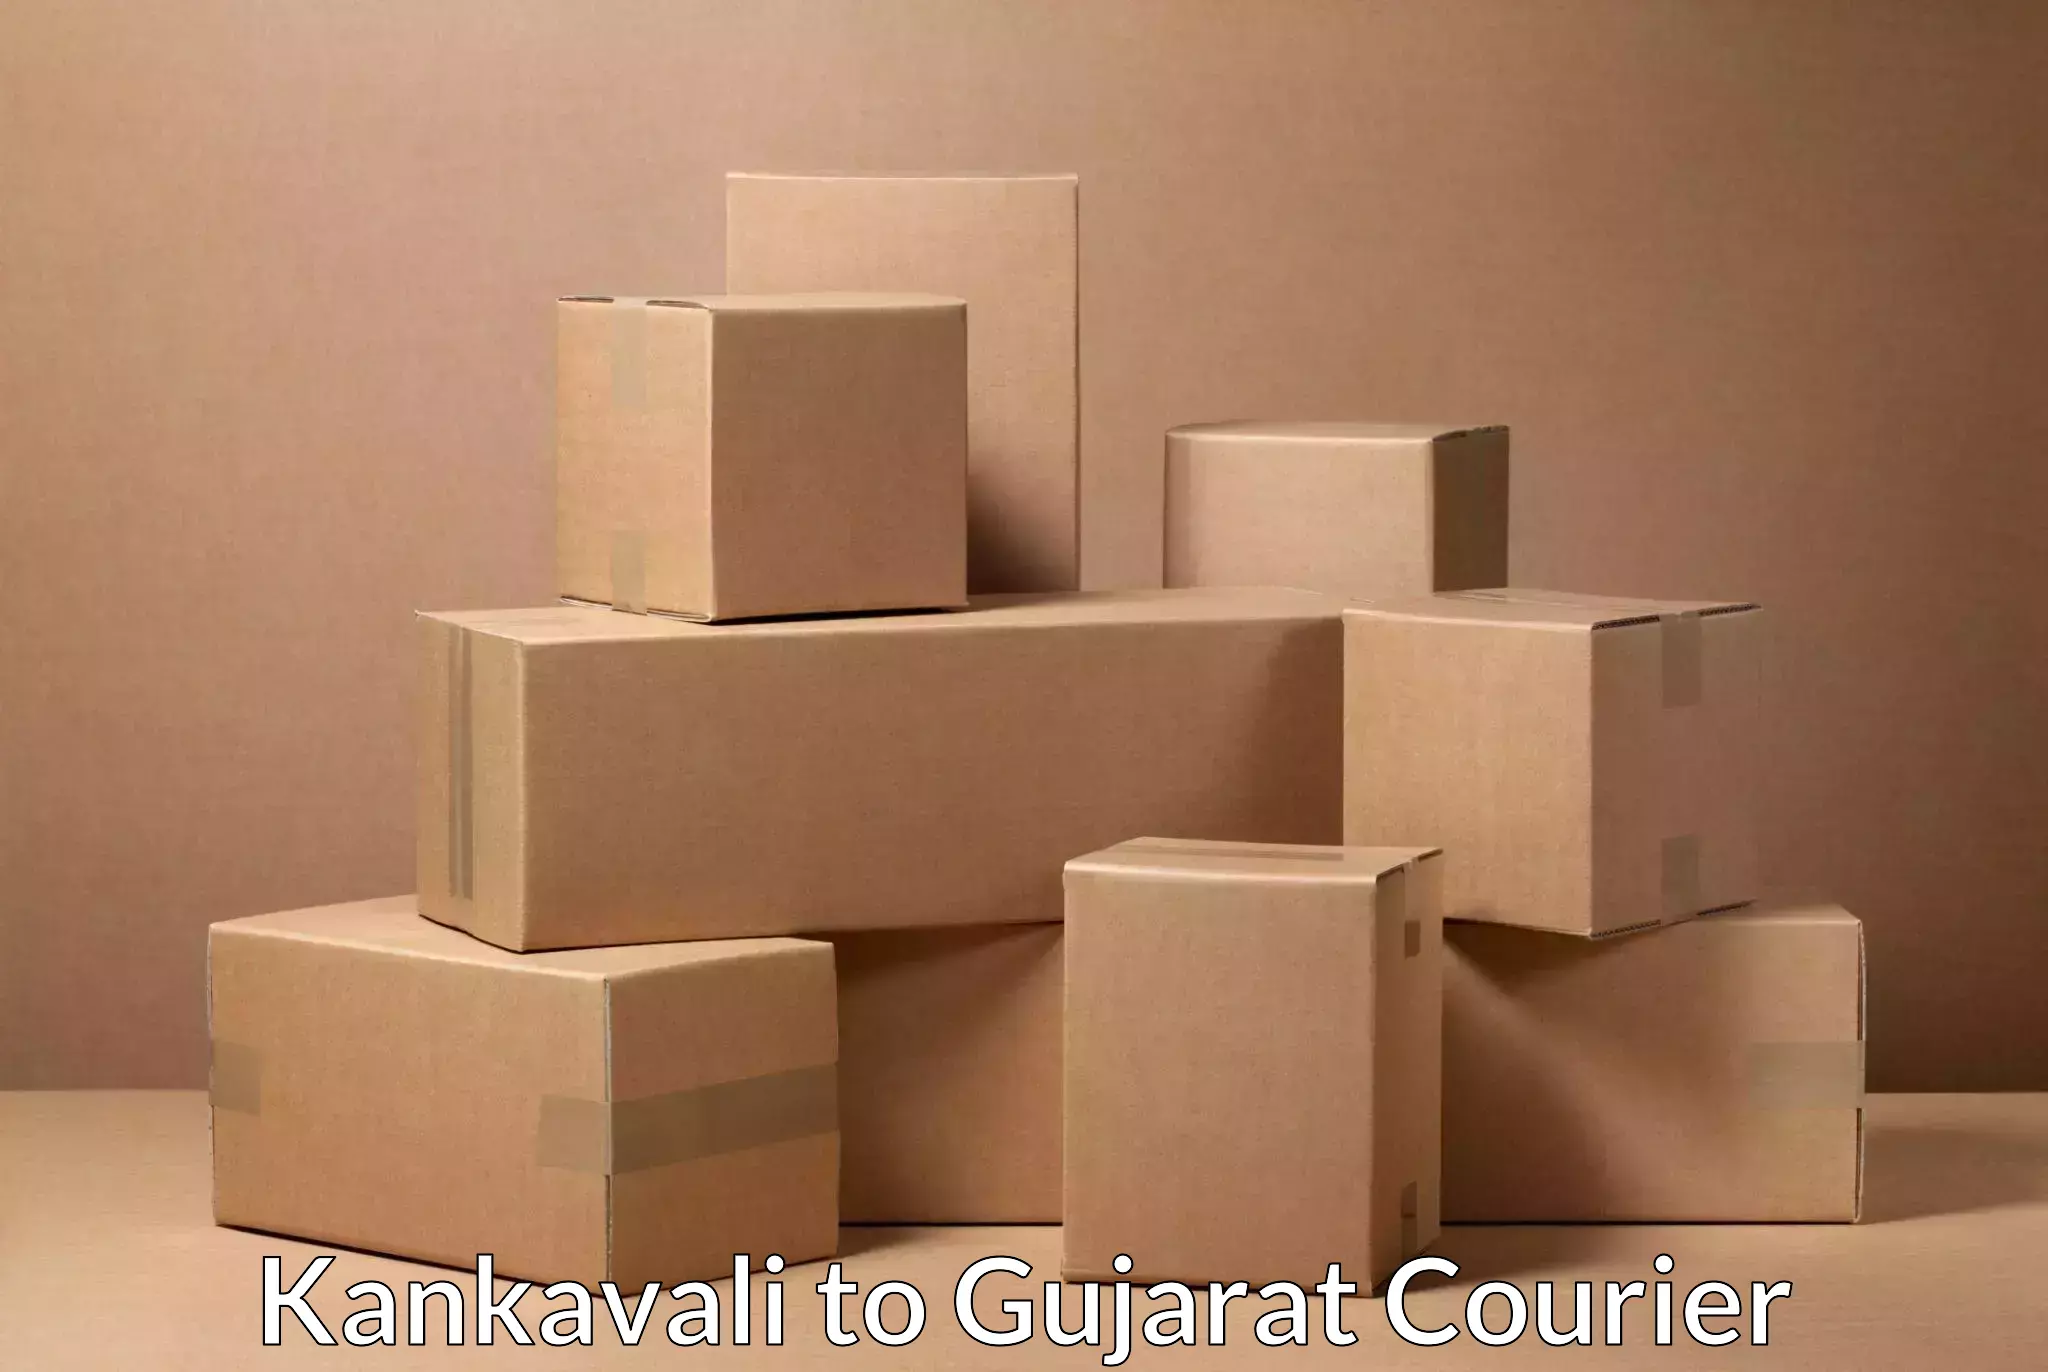 Package delivery network Kankavali to Gujarat